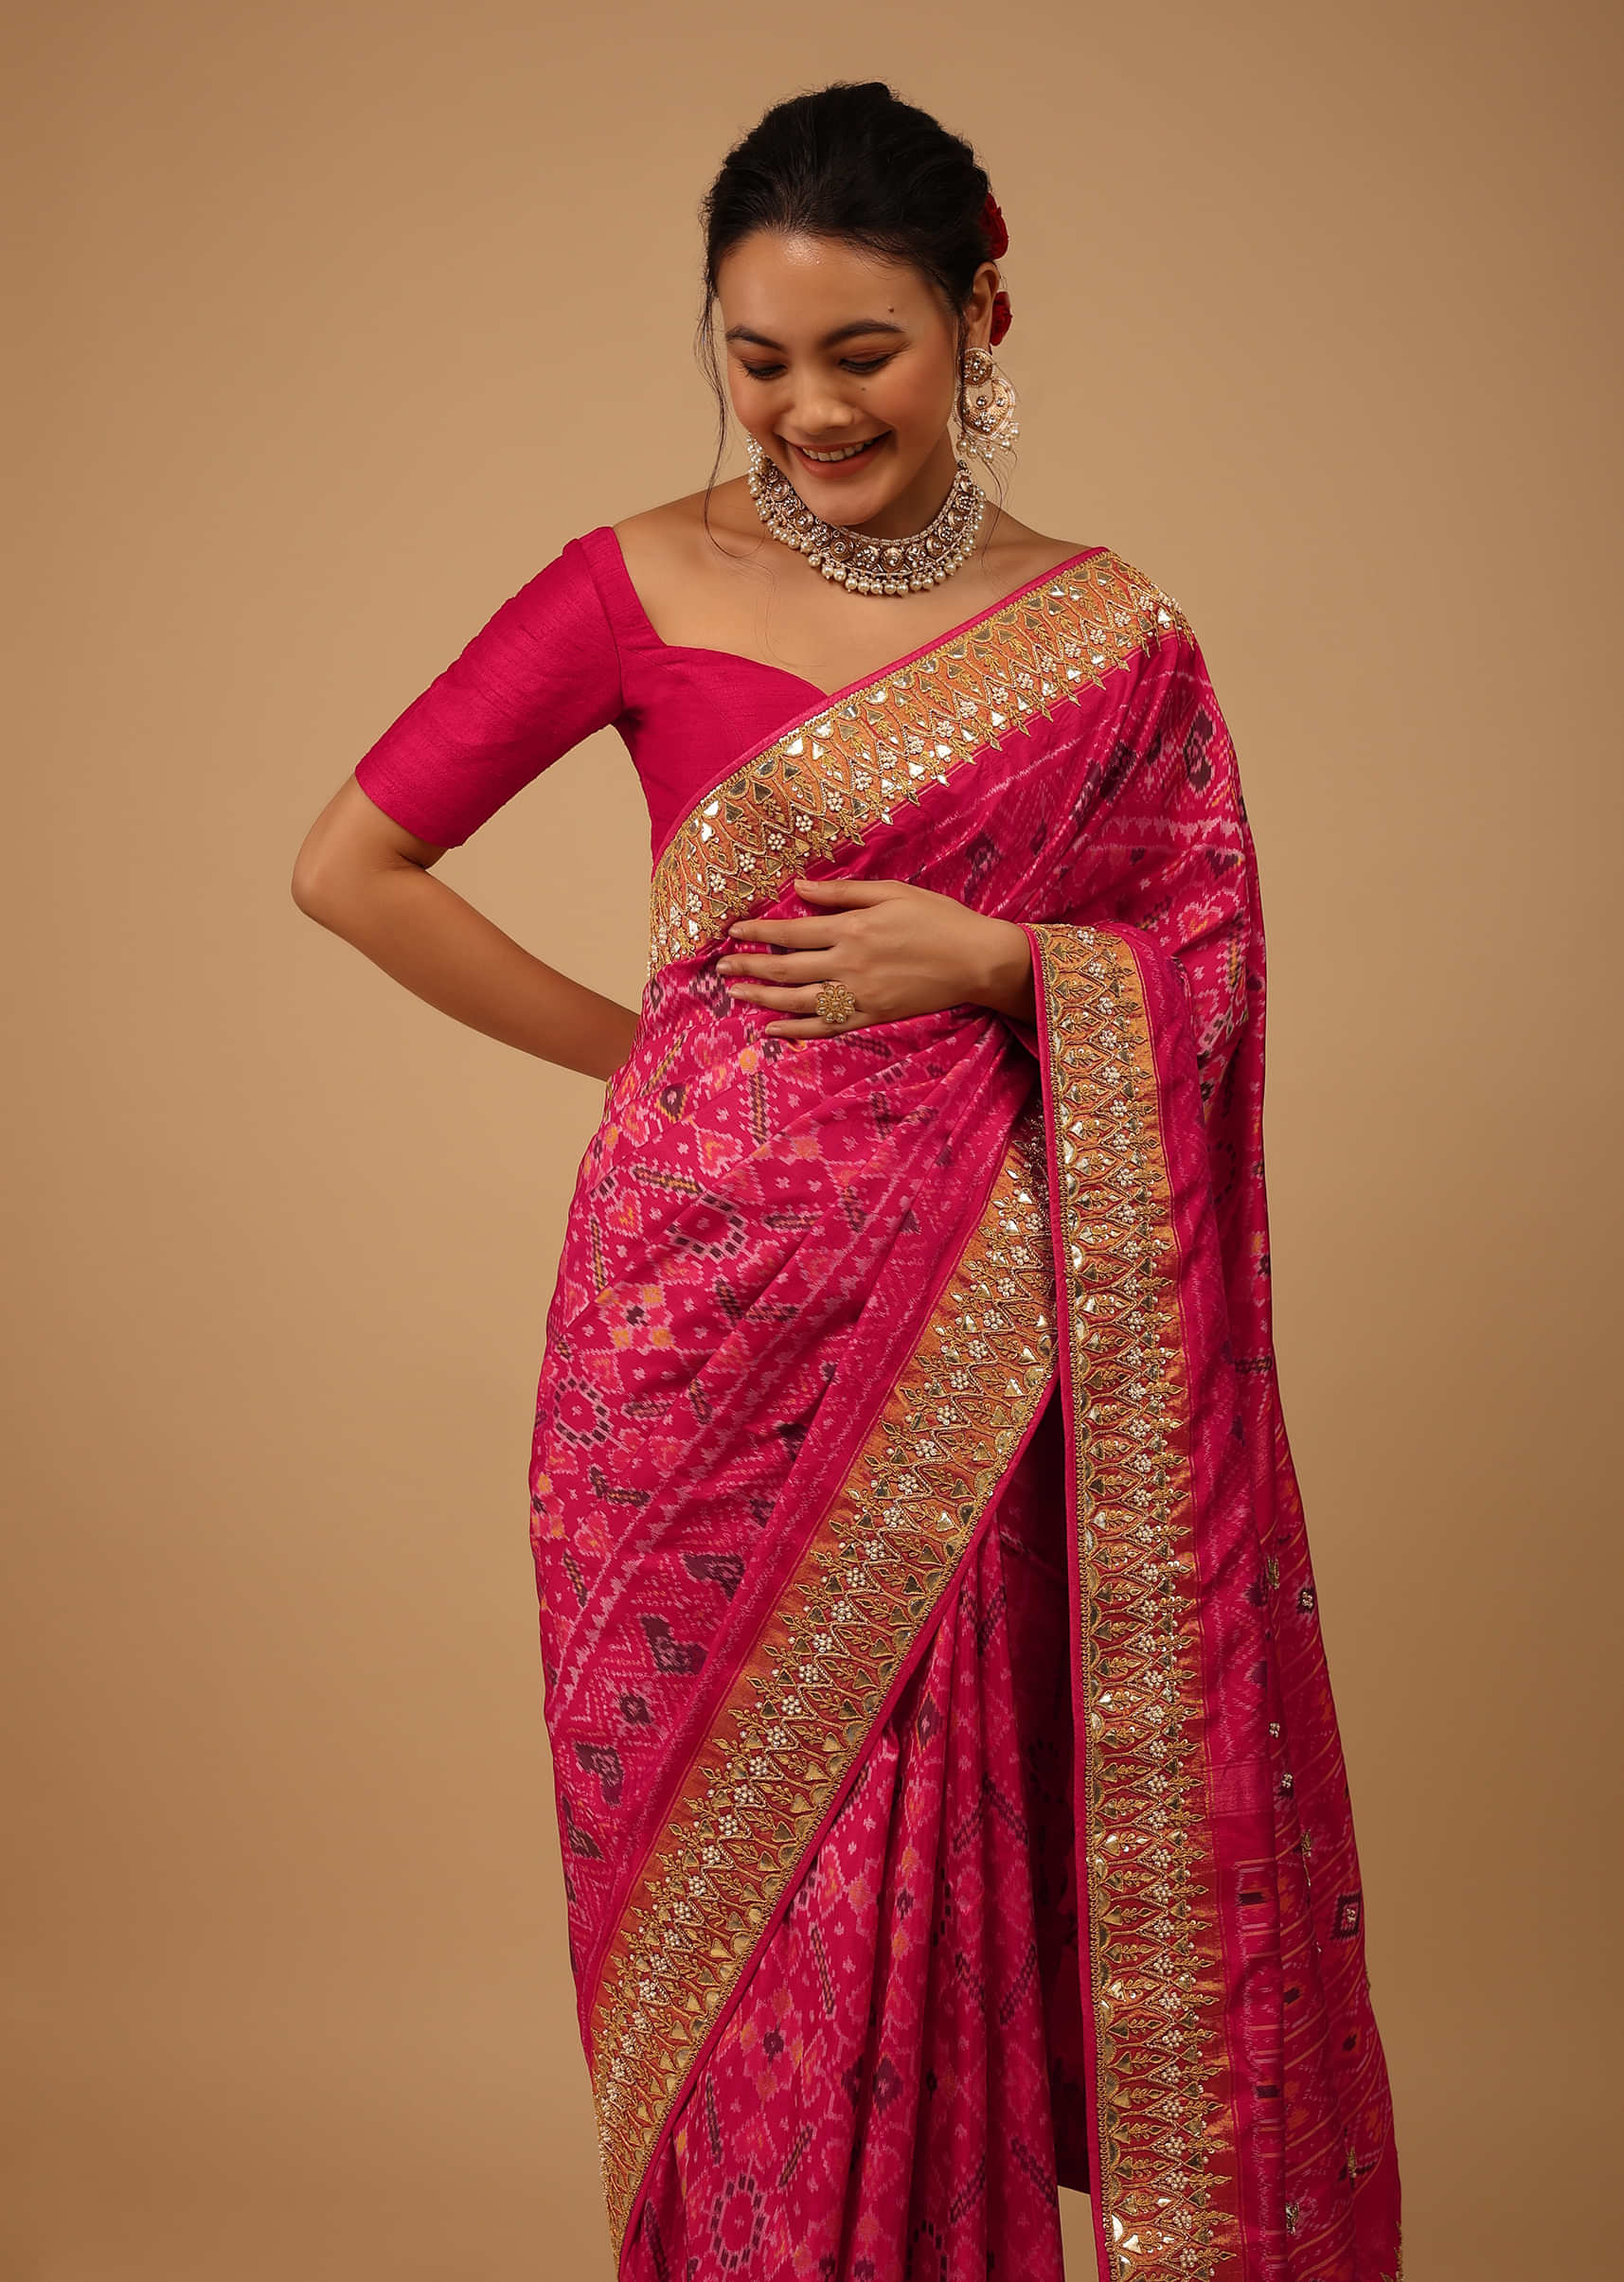 Cherry Pink Saree In Pure Silk With Handloom Patola Ikat Weave